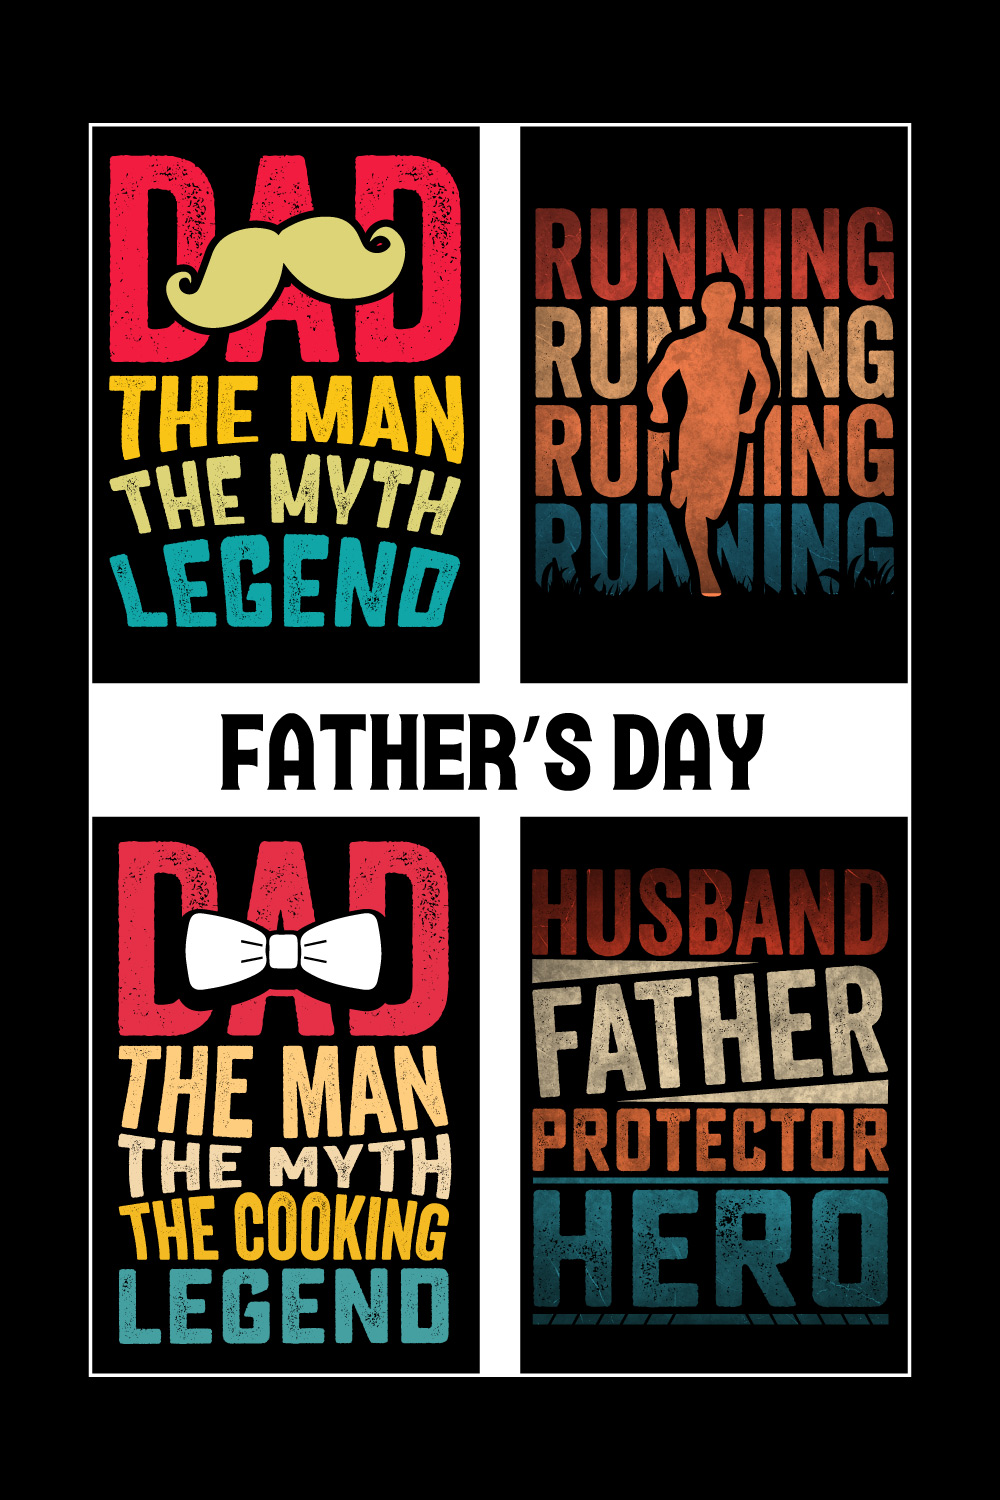 Father's Day T-Shirt- Dad T-Shirt Design- Father's Day T-shirt- Happy Father's Day T-shirt design ideas- Dad's Day- Papa Son- Father's Day shirt ideas for Family- T-shirt Design- Father's Day T-shirt- Trendy T-shirt pinterest preview image.